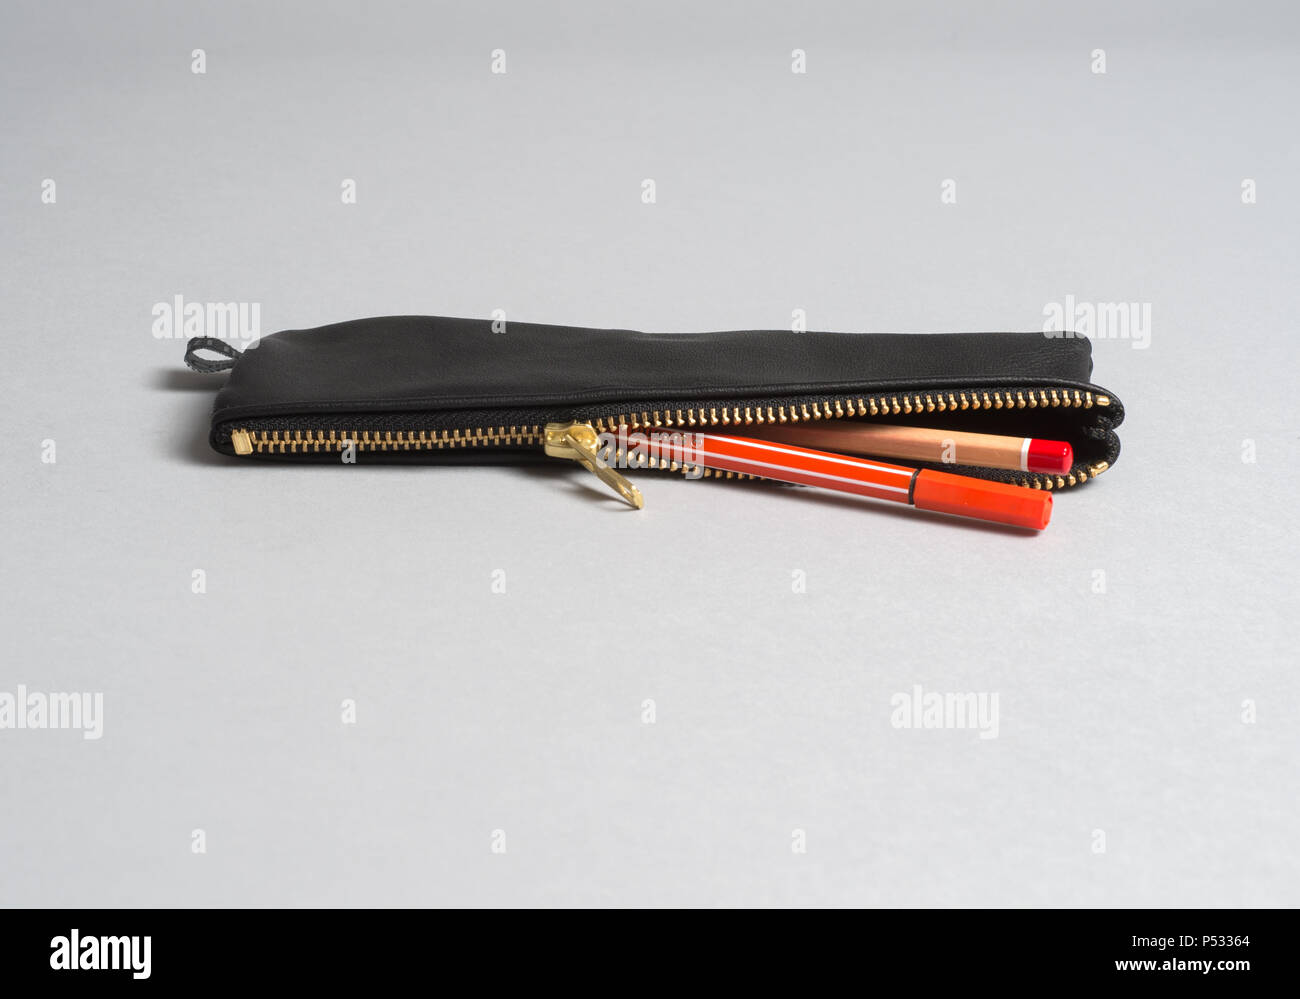 Black pencil case with pens Stock Photo